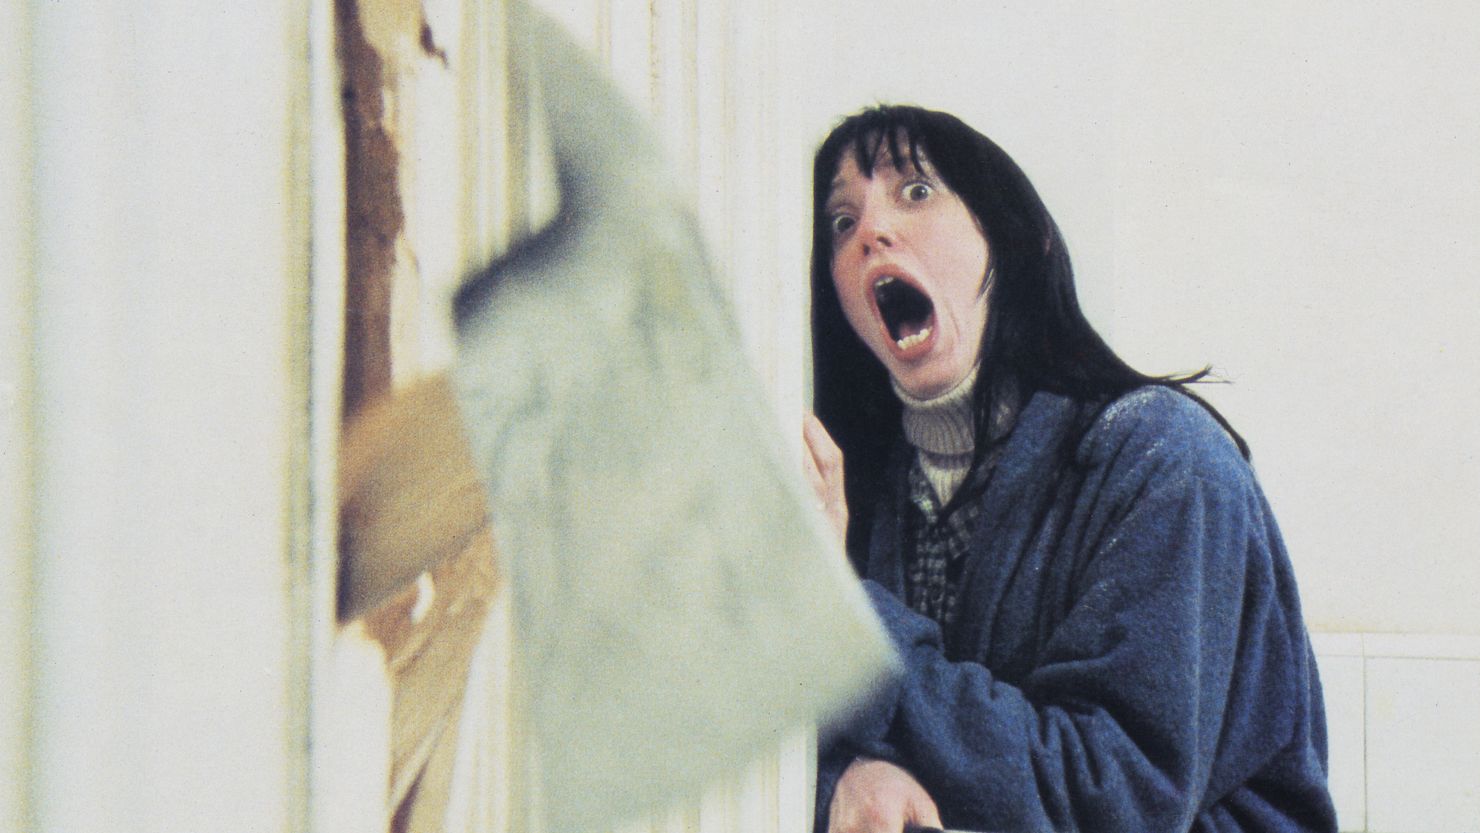 Shelley Duvall in a scene from "The Shining."